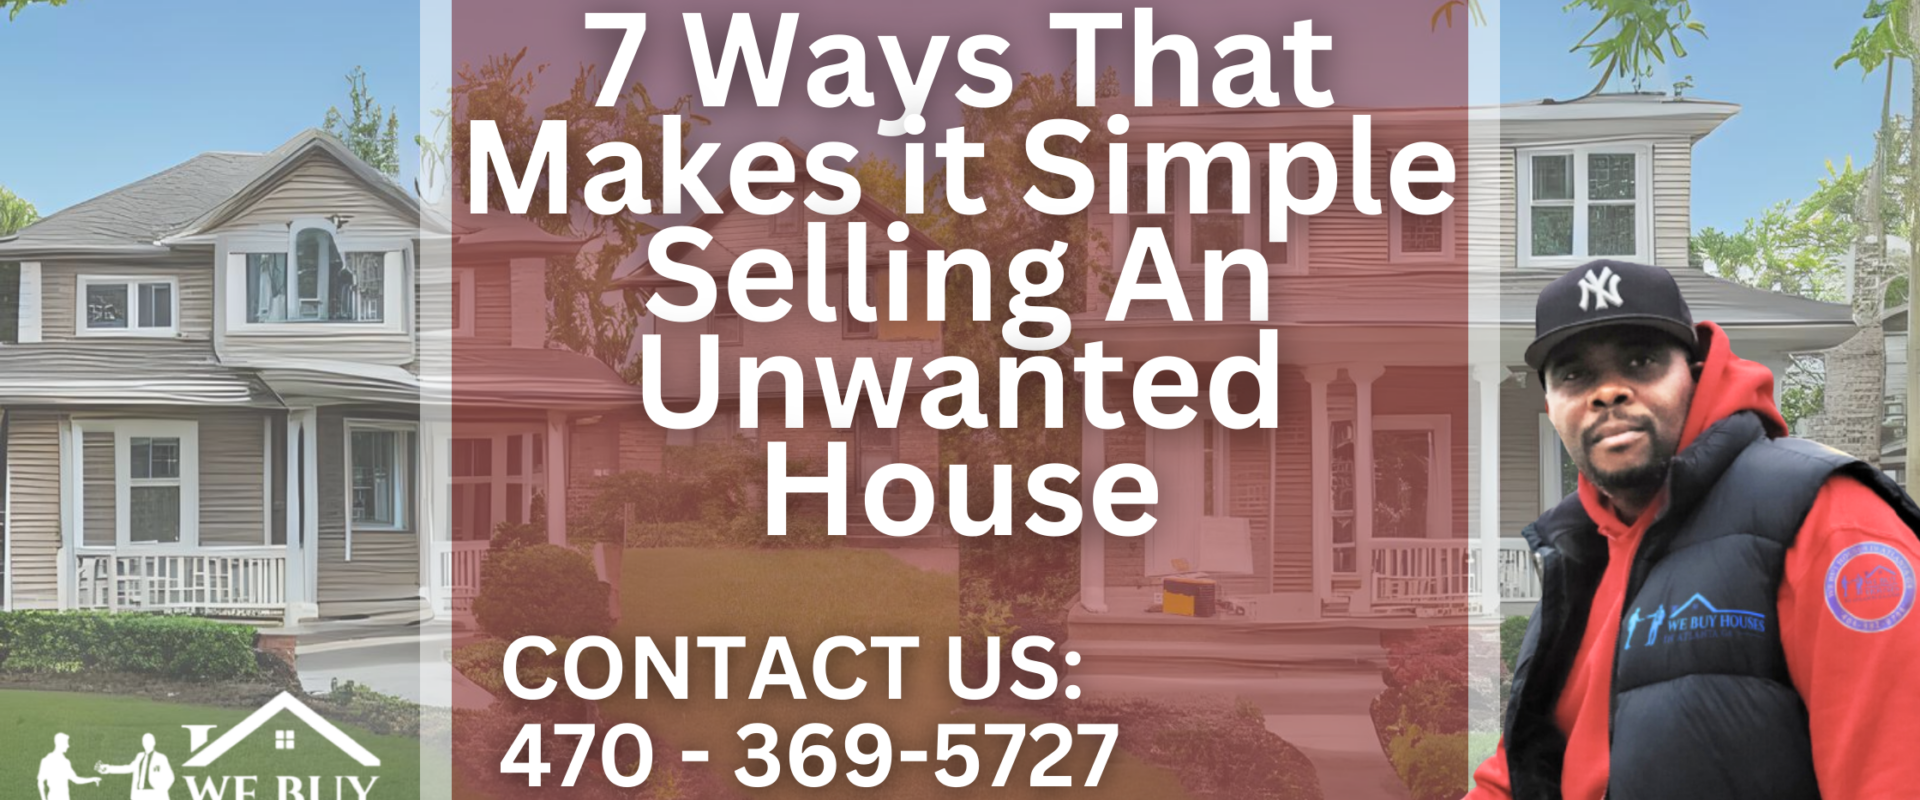 7 Ways That Makes it Simple Selling An Unwanted House